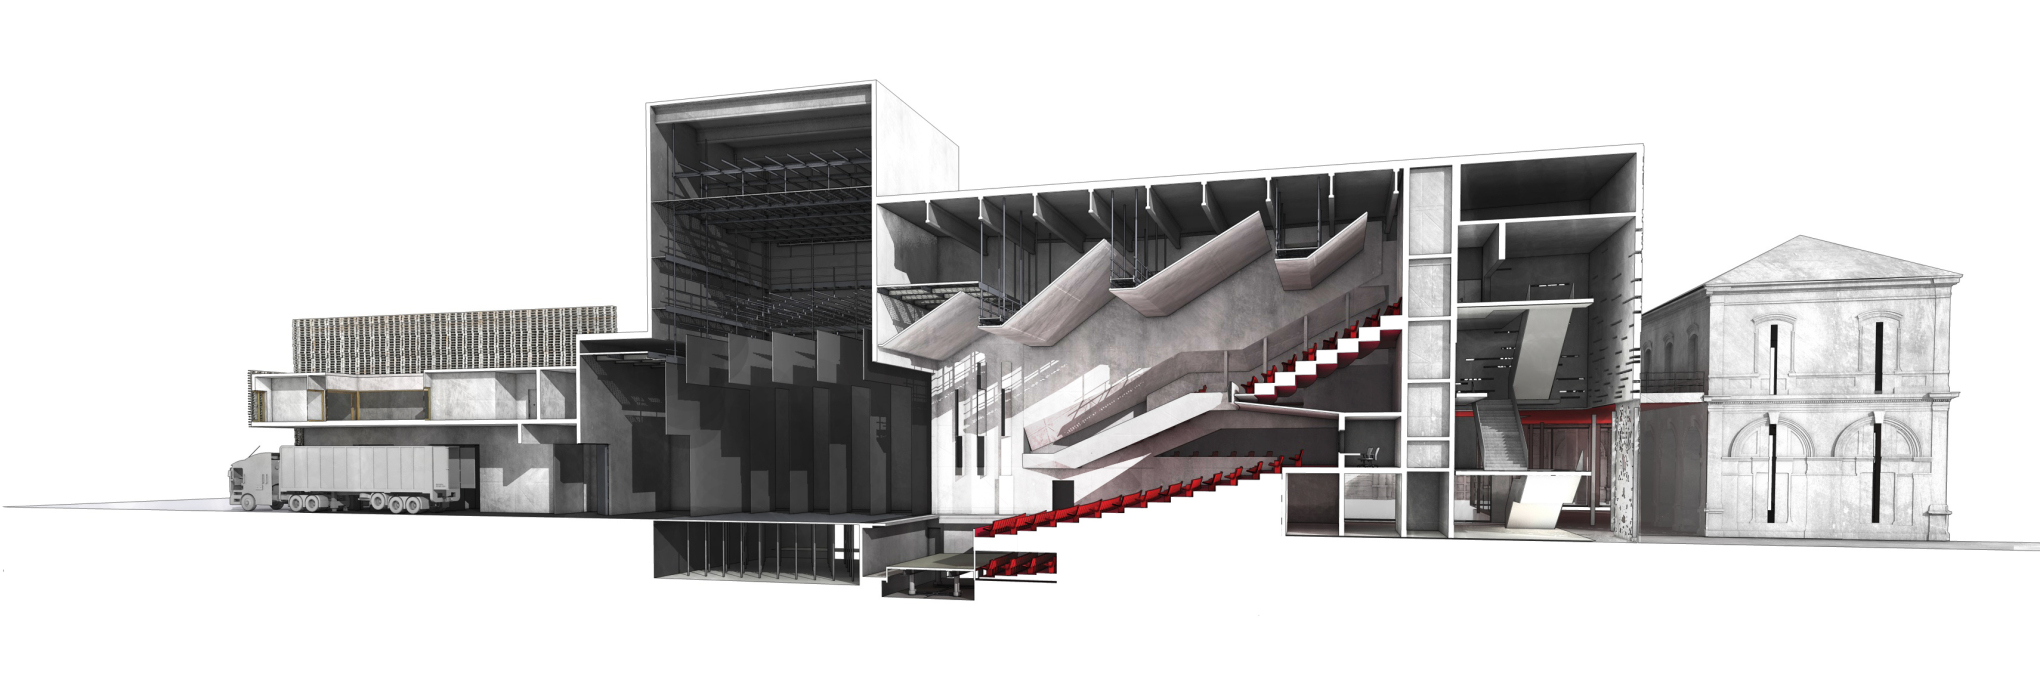 Longitudinal sectional perspective, cut north-south through theater auditorium. (Image: K-architectures)